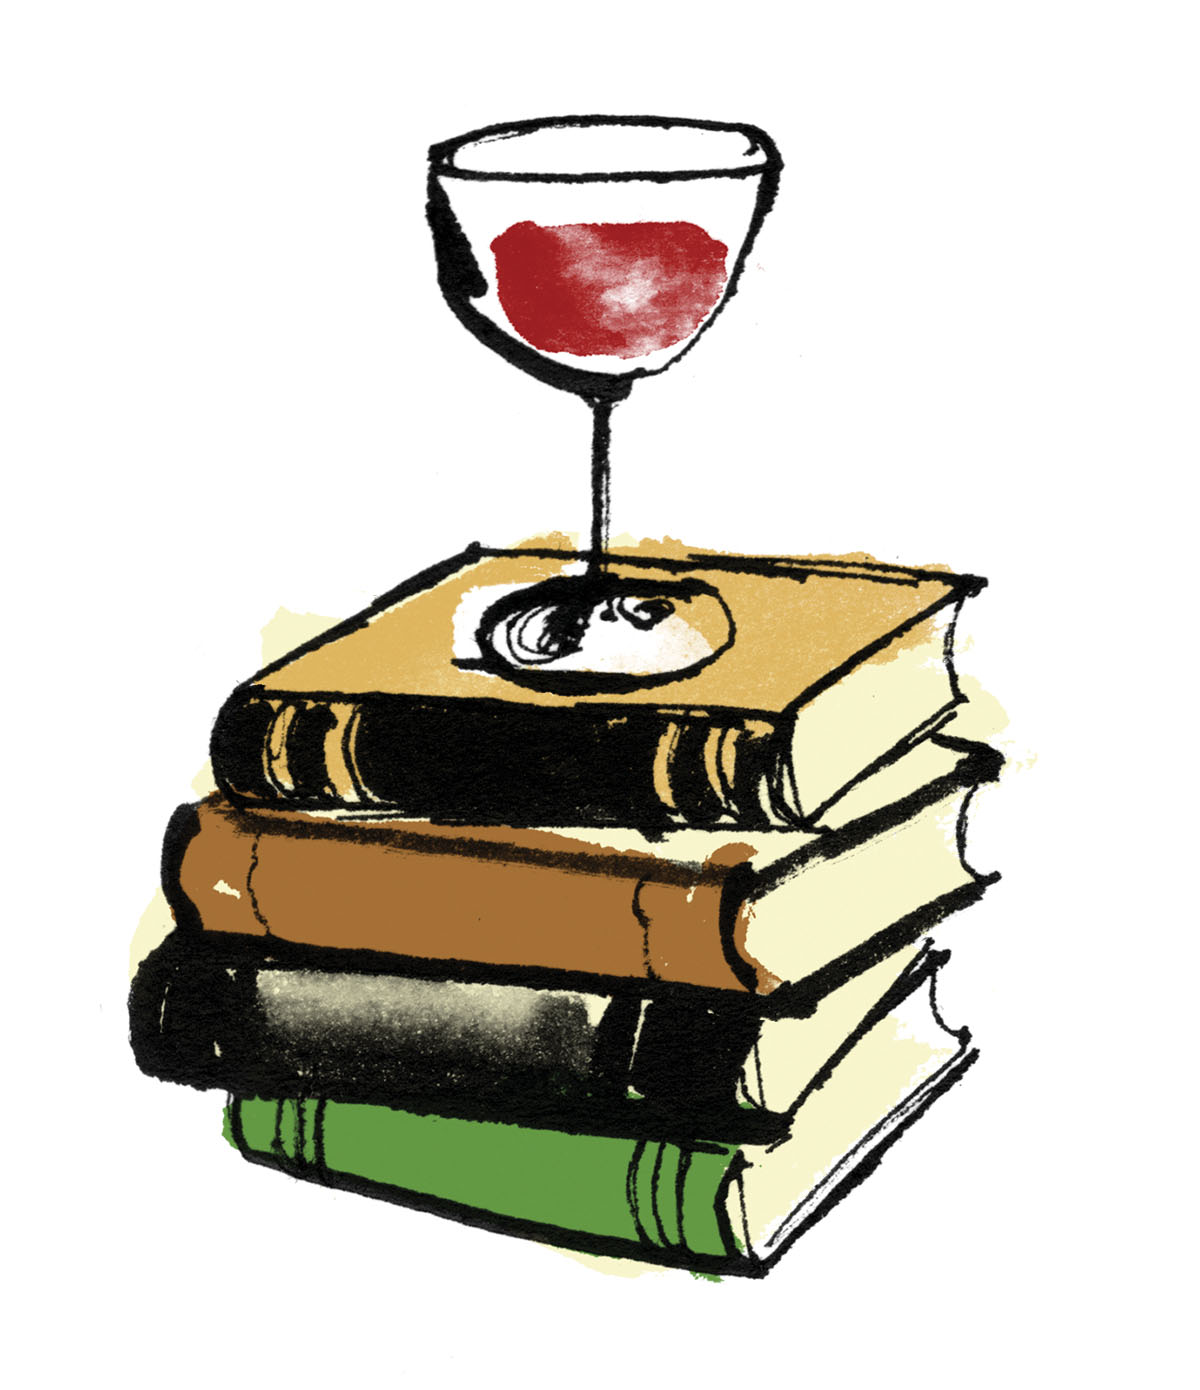 An illustration of a glass of wine on top of a stack of books